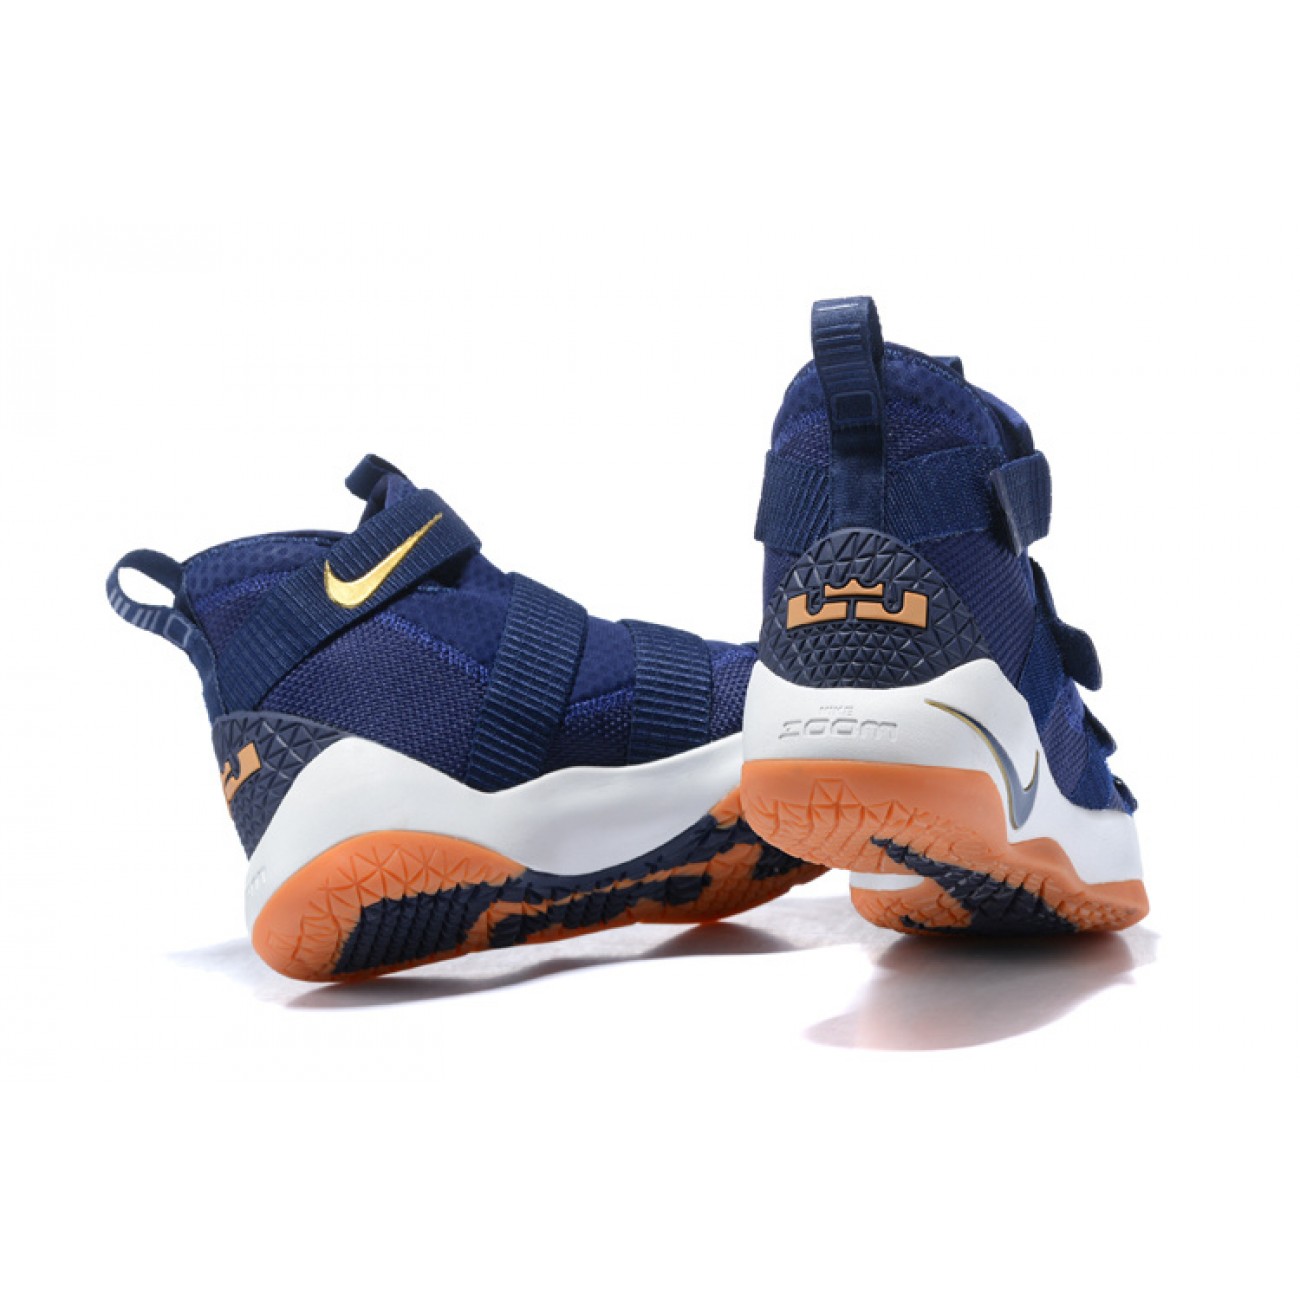 Lebron Soldier 11 "The Cavaliers" Deep Blue/White